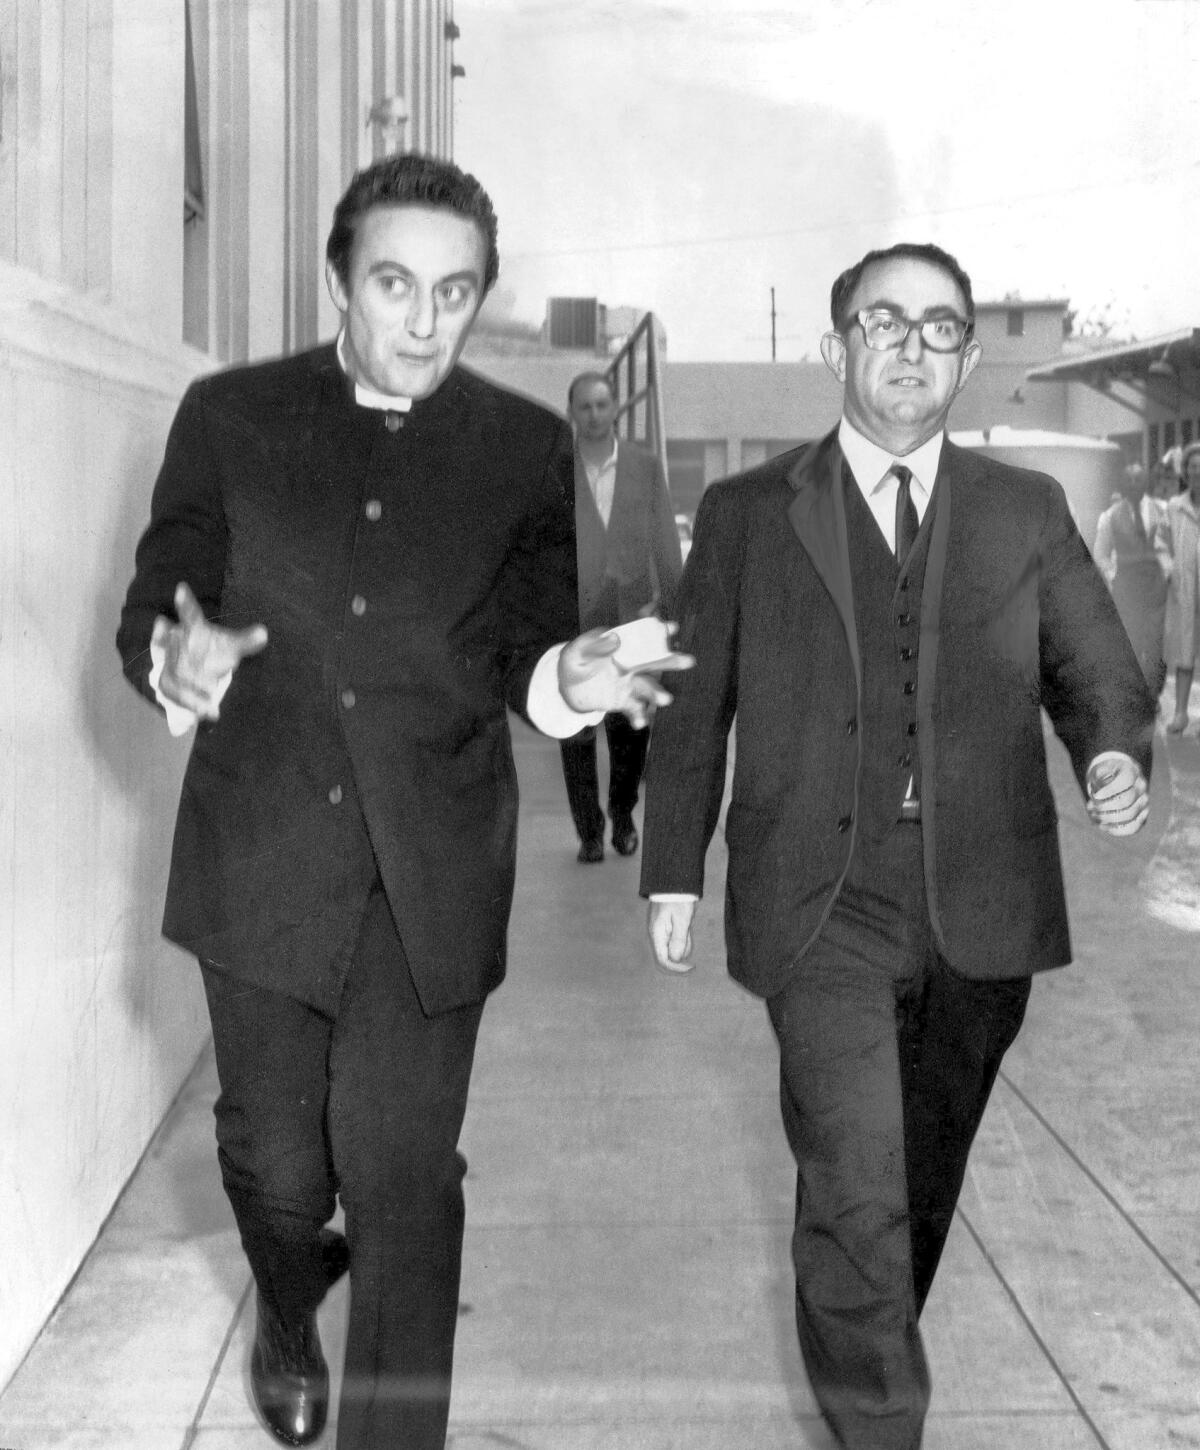 Comic Lenny Bruce, left, leaves jail in Van Nuys with attorney Seymour Lazar in 1962. In 2007, Lazar pleaded guilty to obstruction of justice, filing a false tax return and making a false declaration.